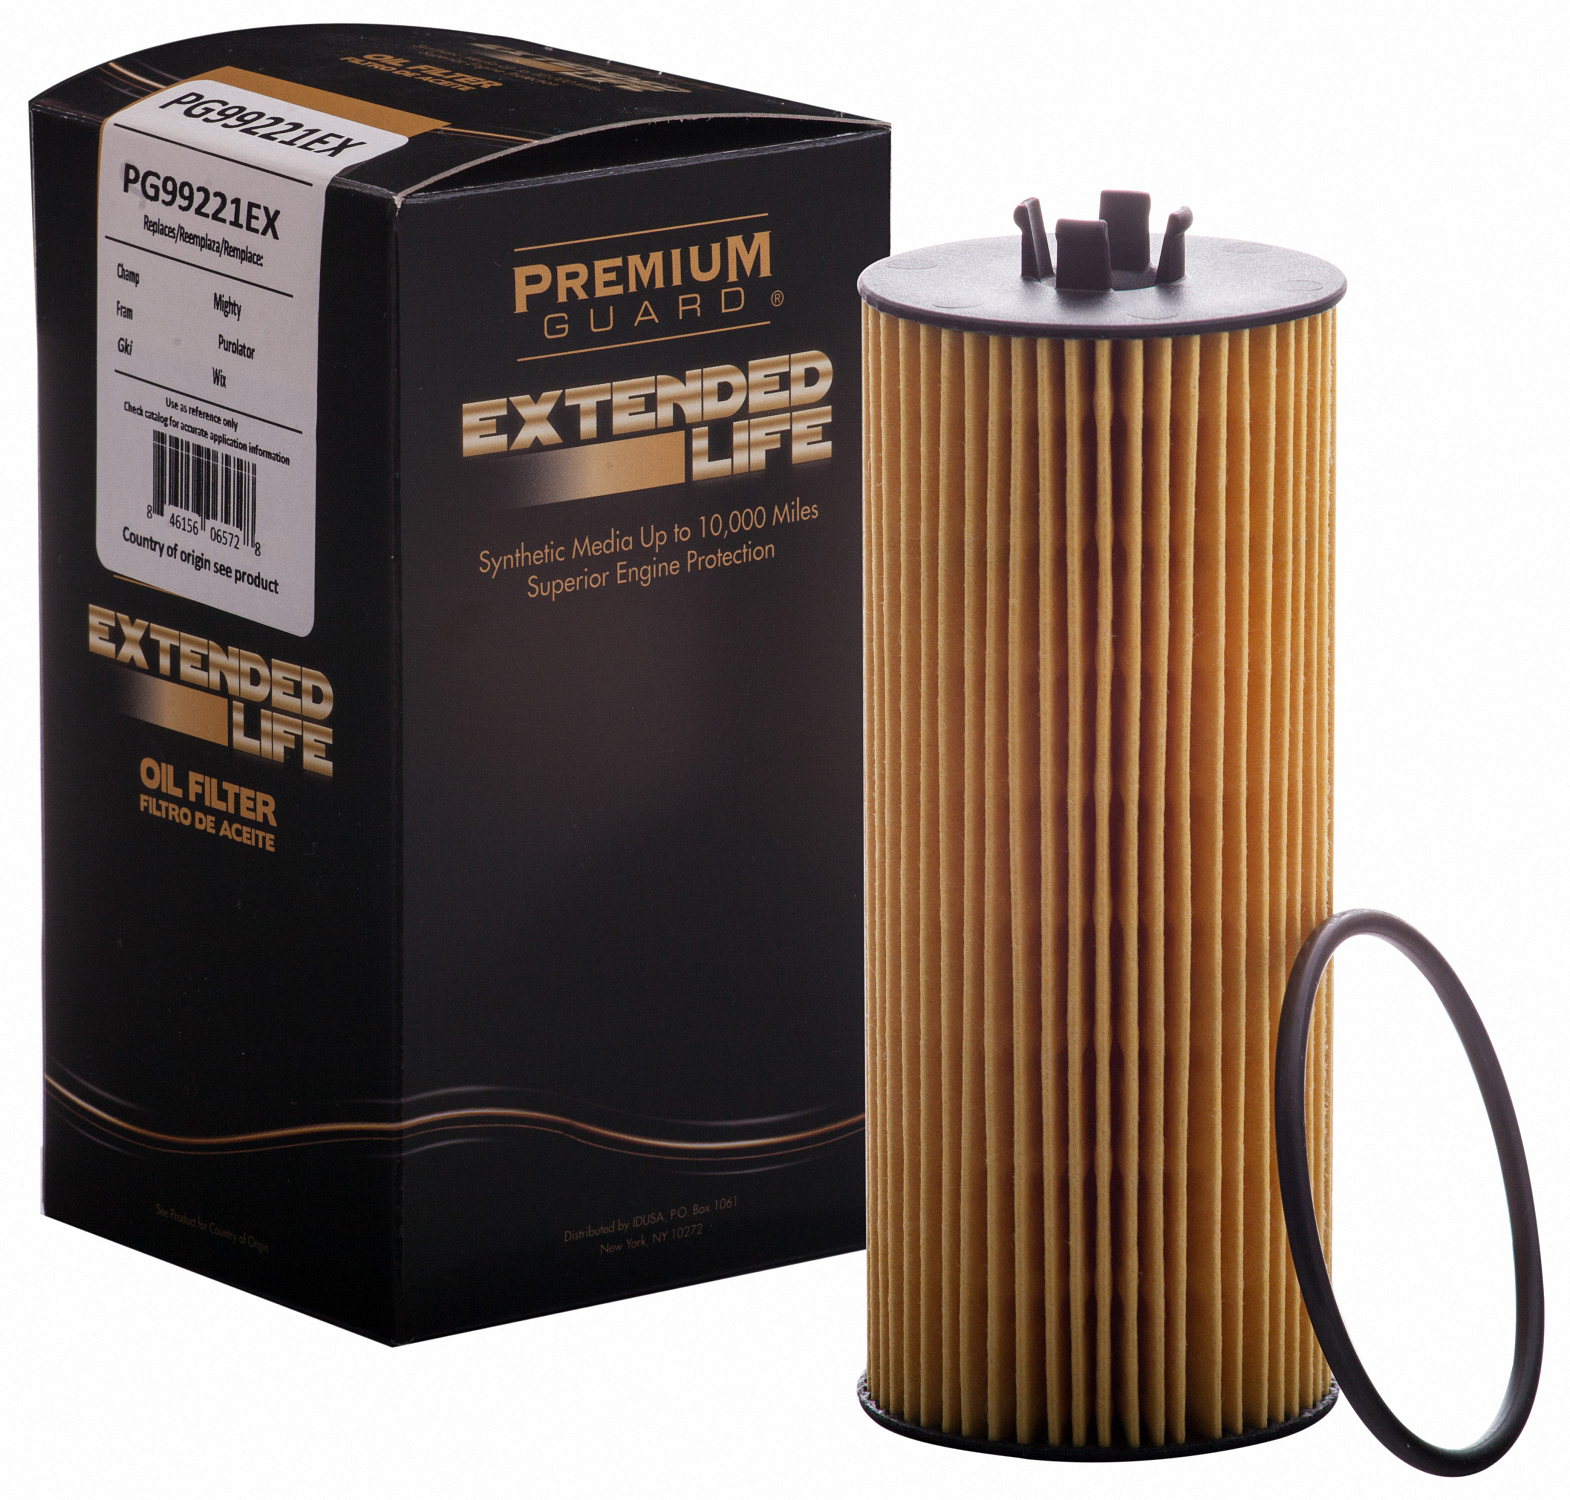 Premium PG99221EX Extended Life Oil Filter - image 1 of 6